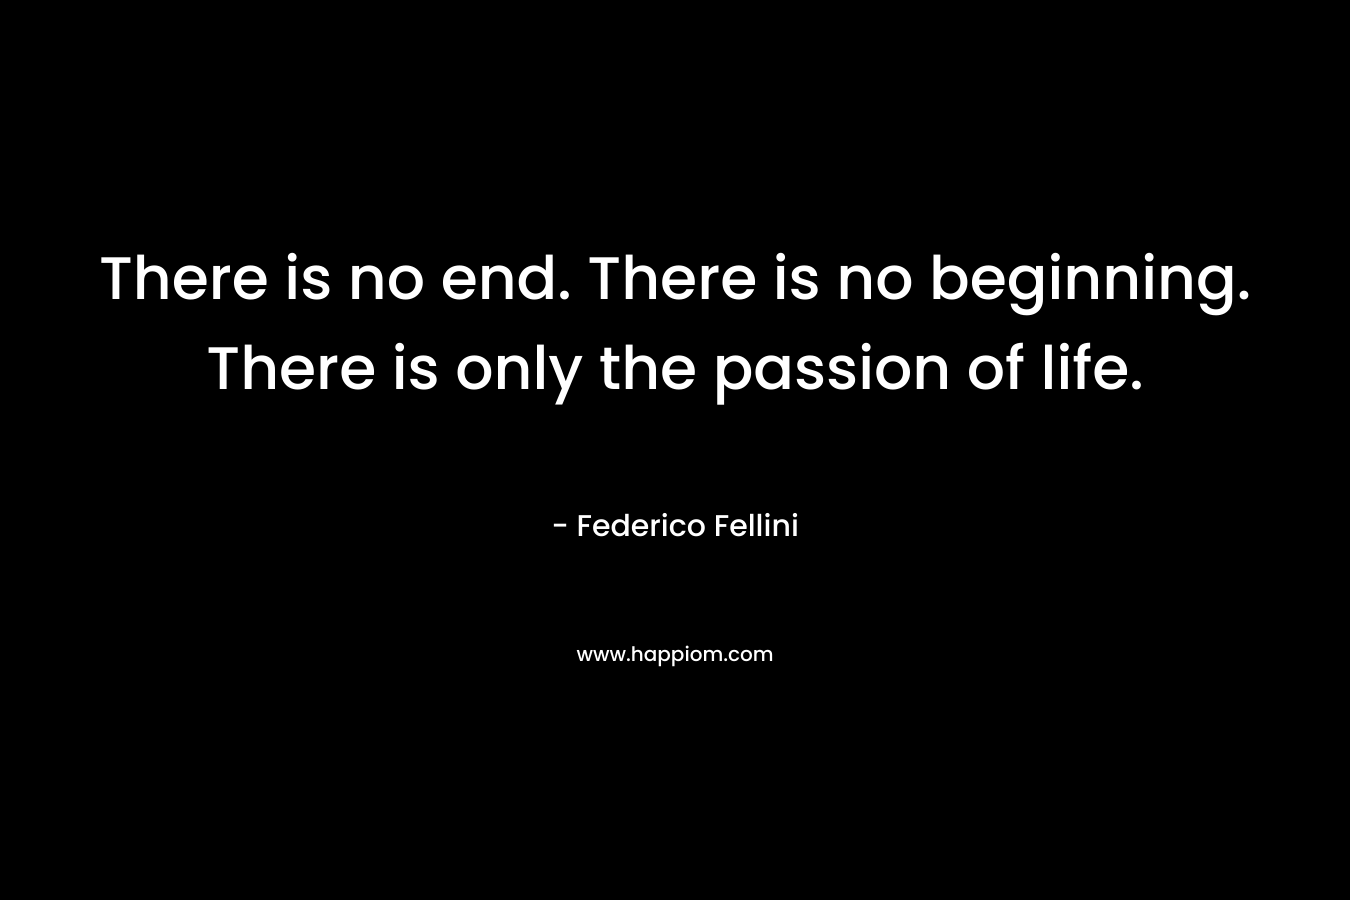 There is no end. There is no beginning. There is only the passion of life.